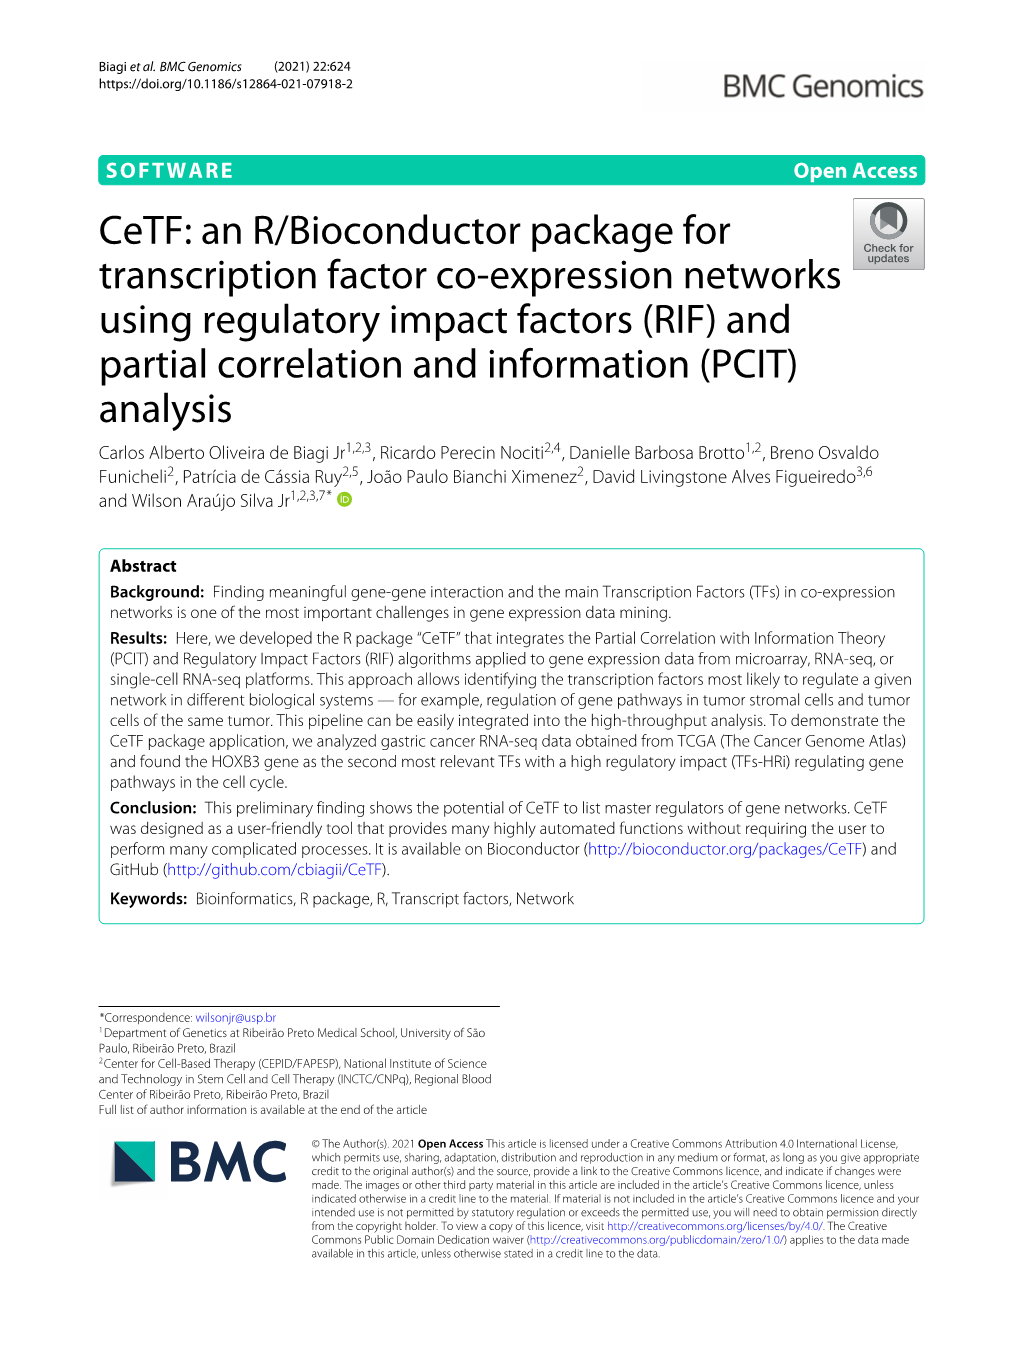 An R/Bioconductor Package for Transcription Factor